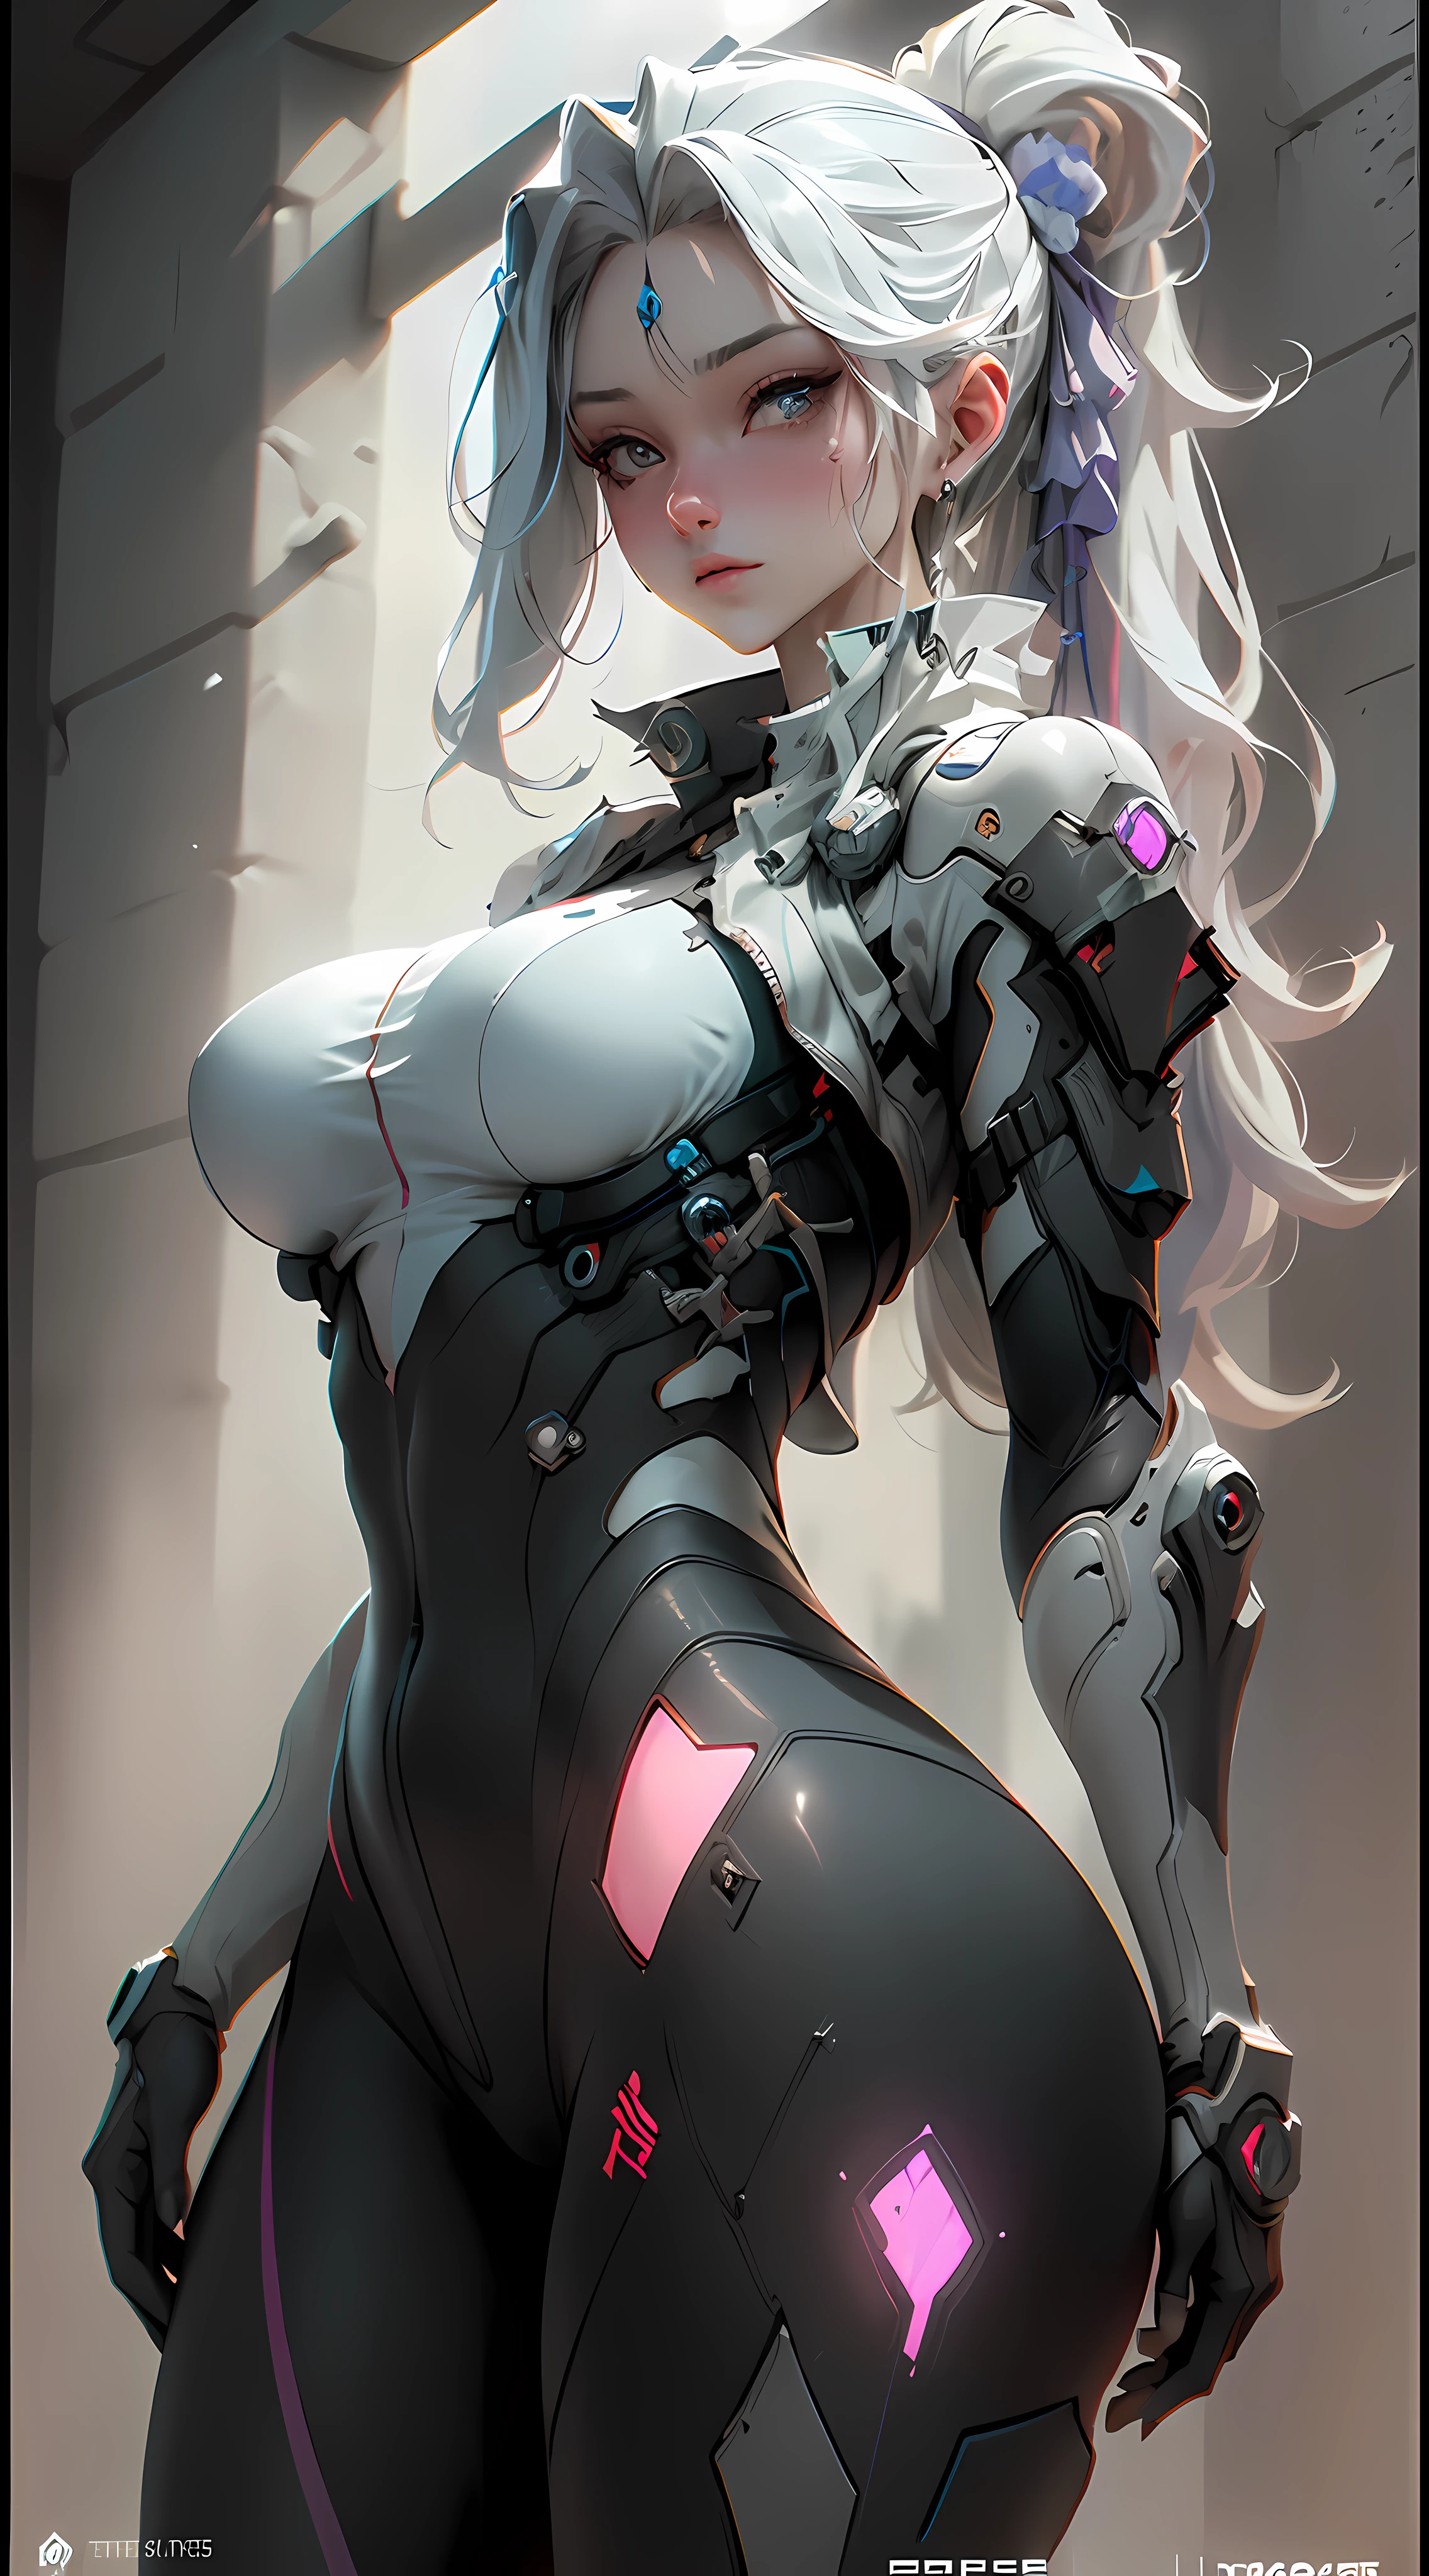 ((Best quality)), ((masterpiece)), (detailed:1.4), 3D, an image of a beautiful cyberpunk female, huge breasts, HDR (High Dynamic Range),Ray Tracing,NVIDIA RTX,Super-Resolution,Unreal 5,Subsurface scattering,PBR Texturing,Post-processing,Anisotropic Filtering,Depth-of-field,Maximum clarity and sharpness,Multi-layered textures,Albedo and Specular maps,Surface shading,Accurate simulation of light-material interaction,Perfect proportions,Octane Render,Two-tone lighting,Wide aperture,Low ISO,White balance,Rule of thirds,8K RAW,